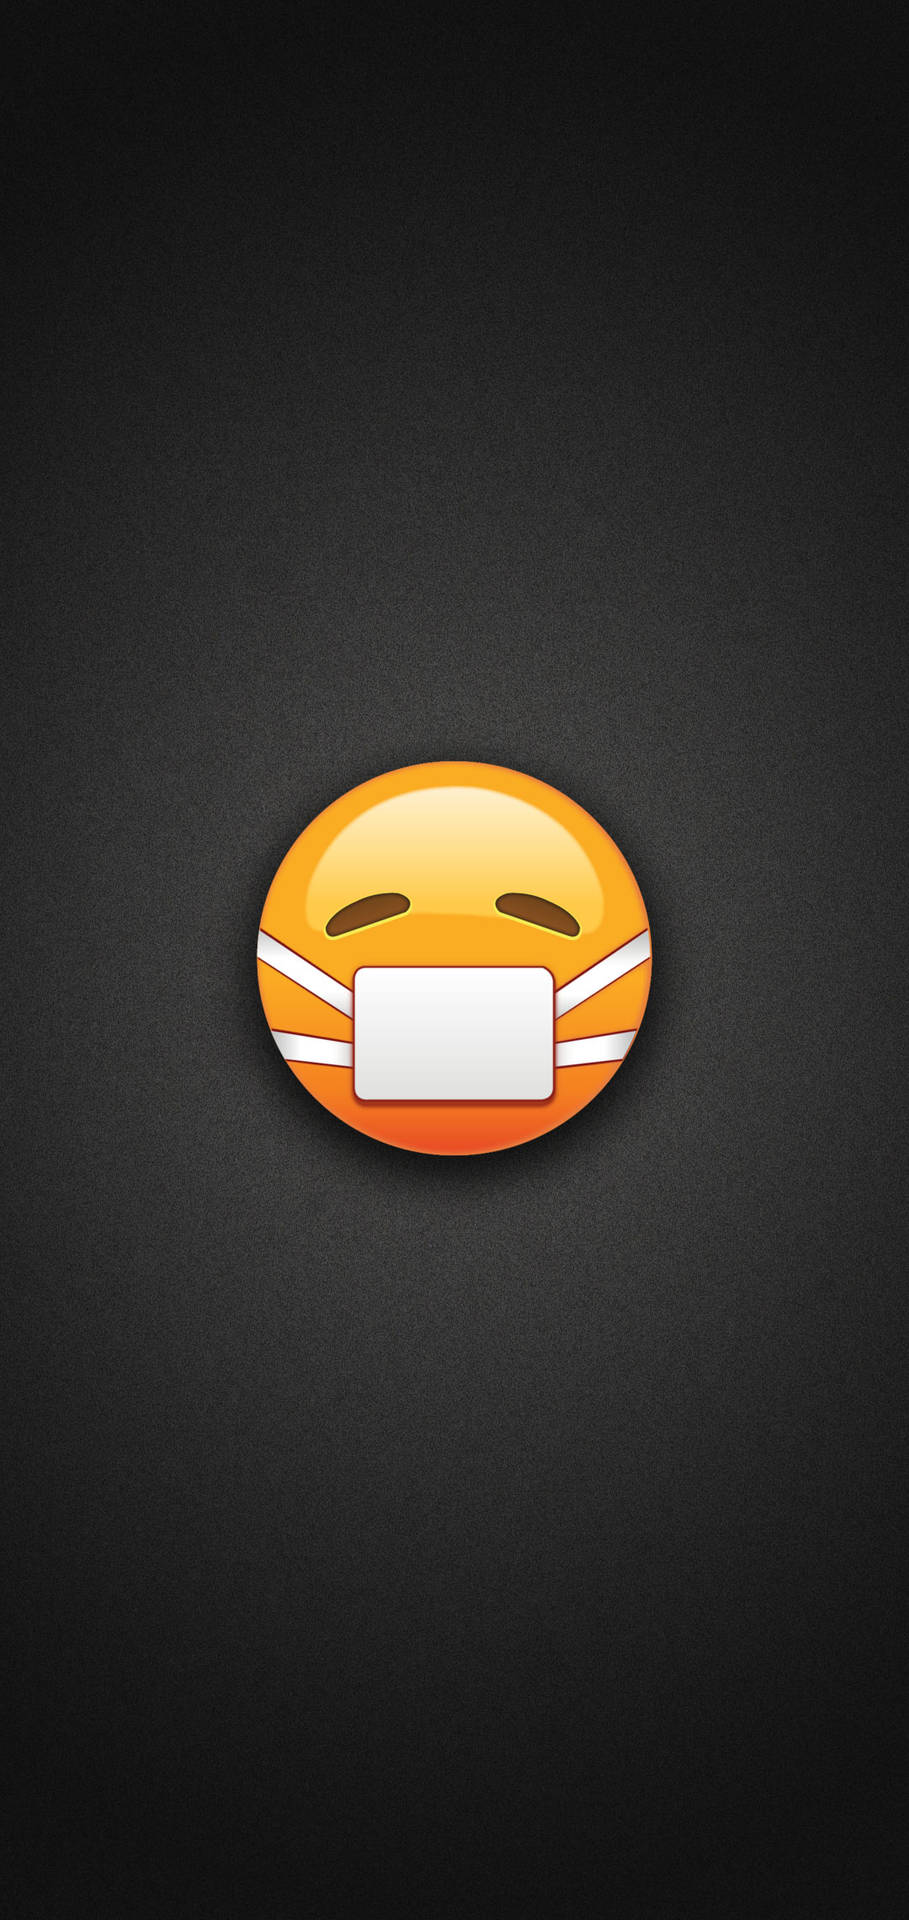 Nauseous Face Emoji With Face Mask Wallpaper